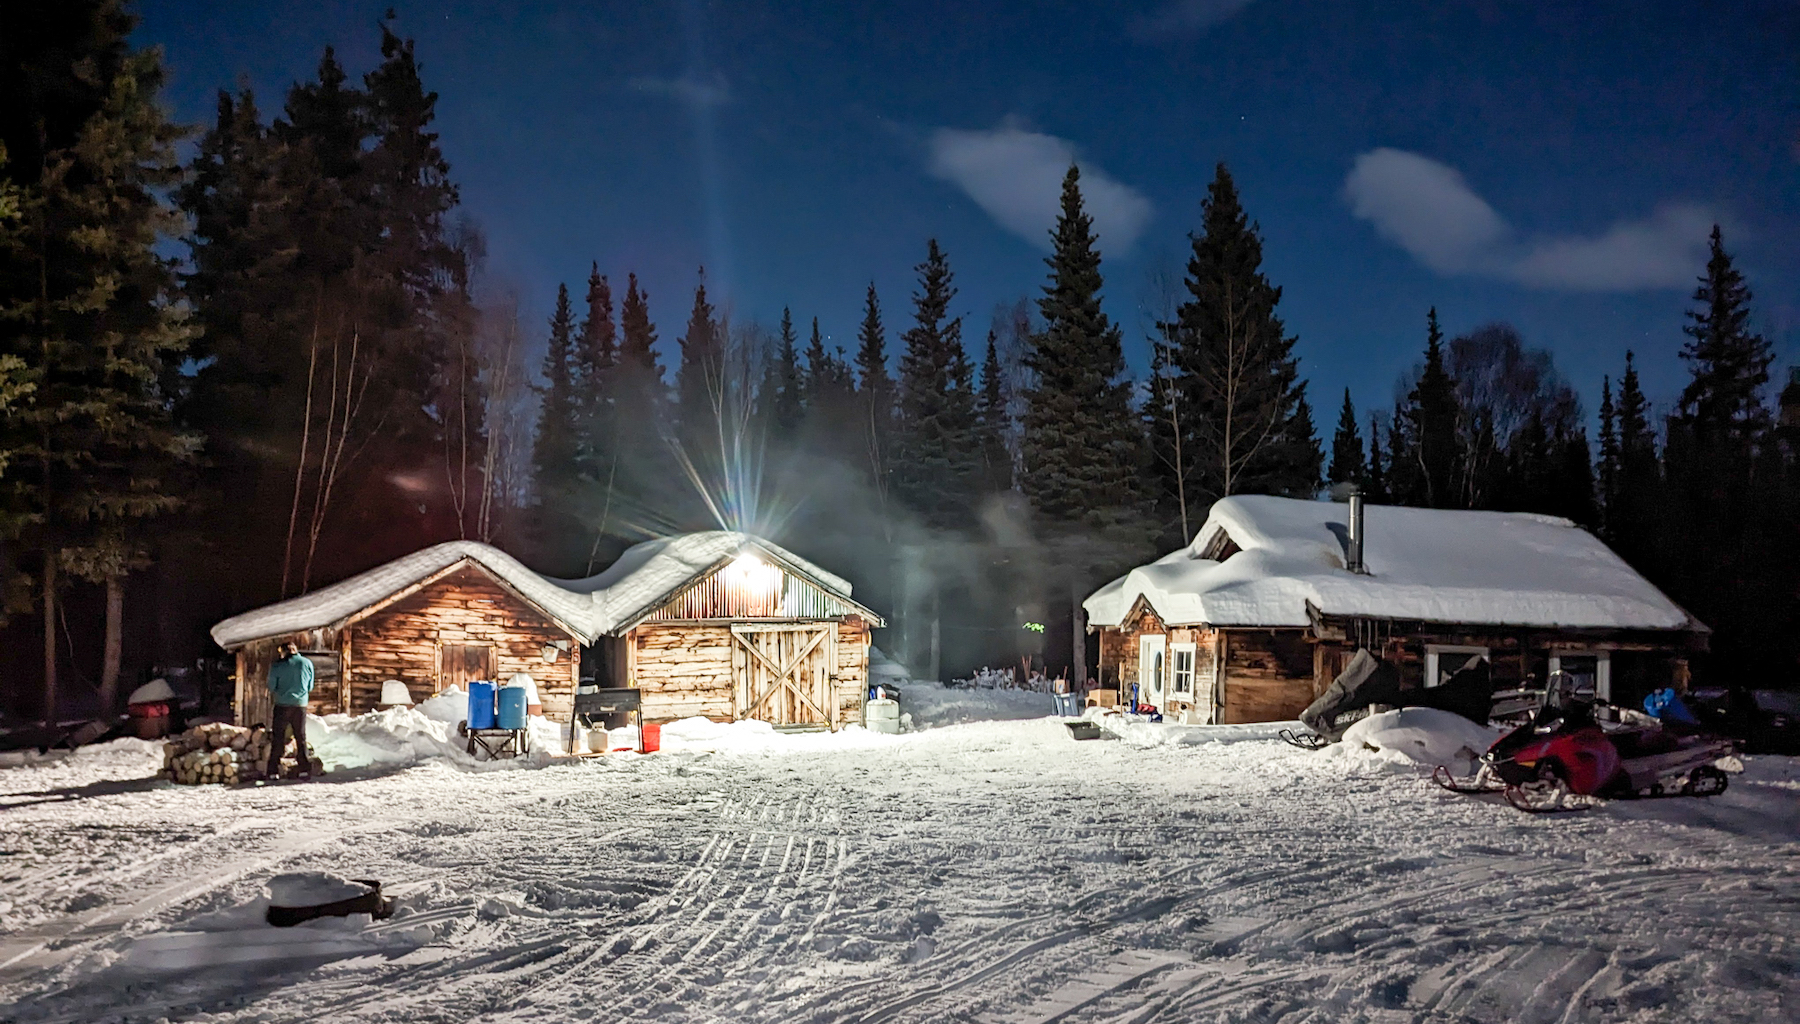 A light illuminates a set of snow-covered cabins at night.